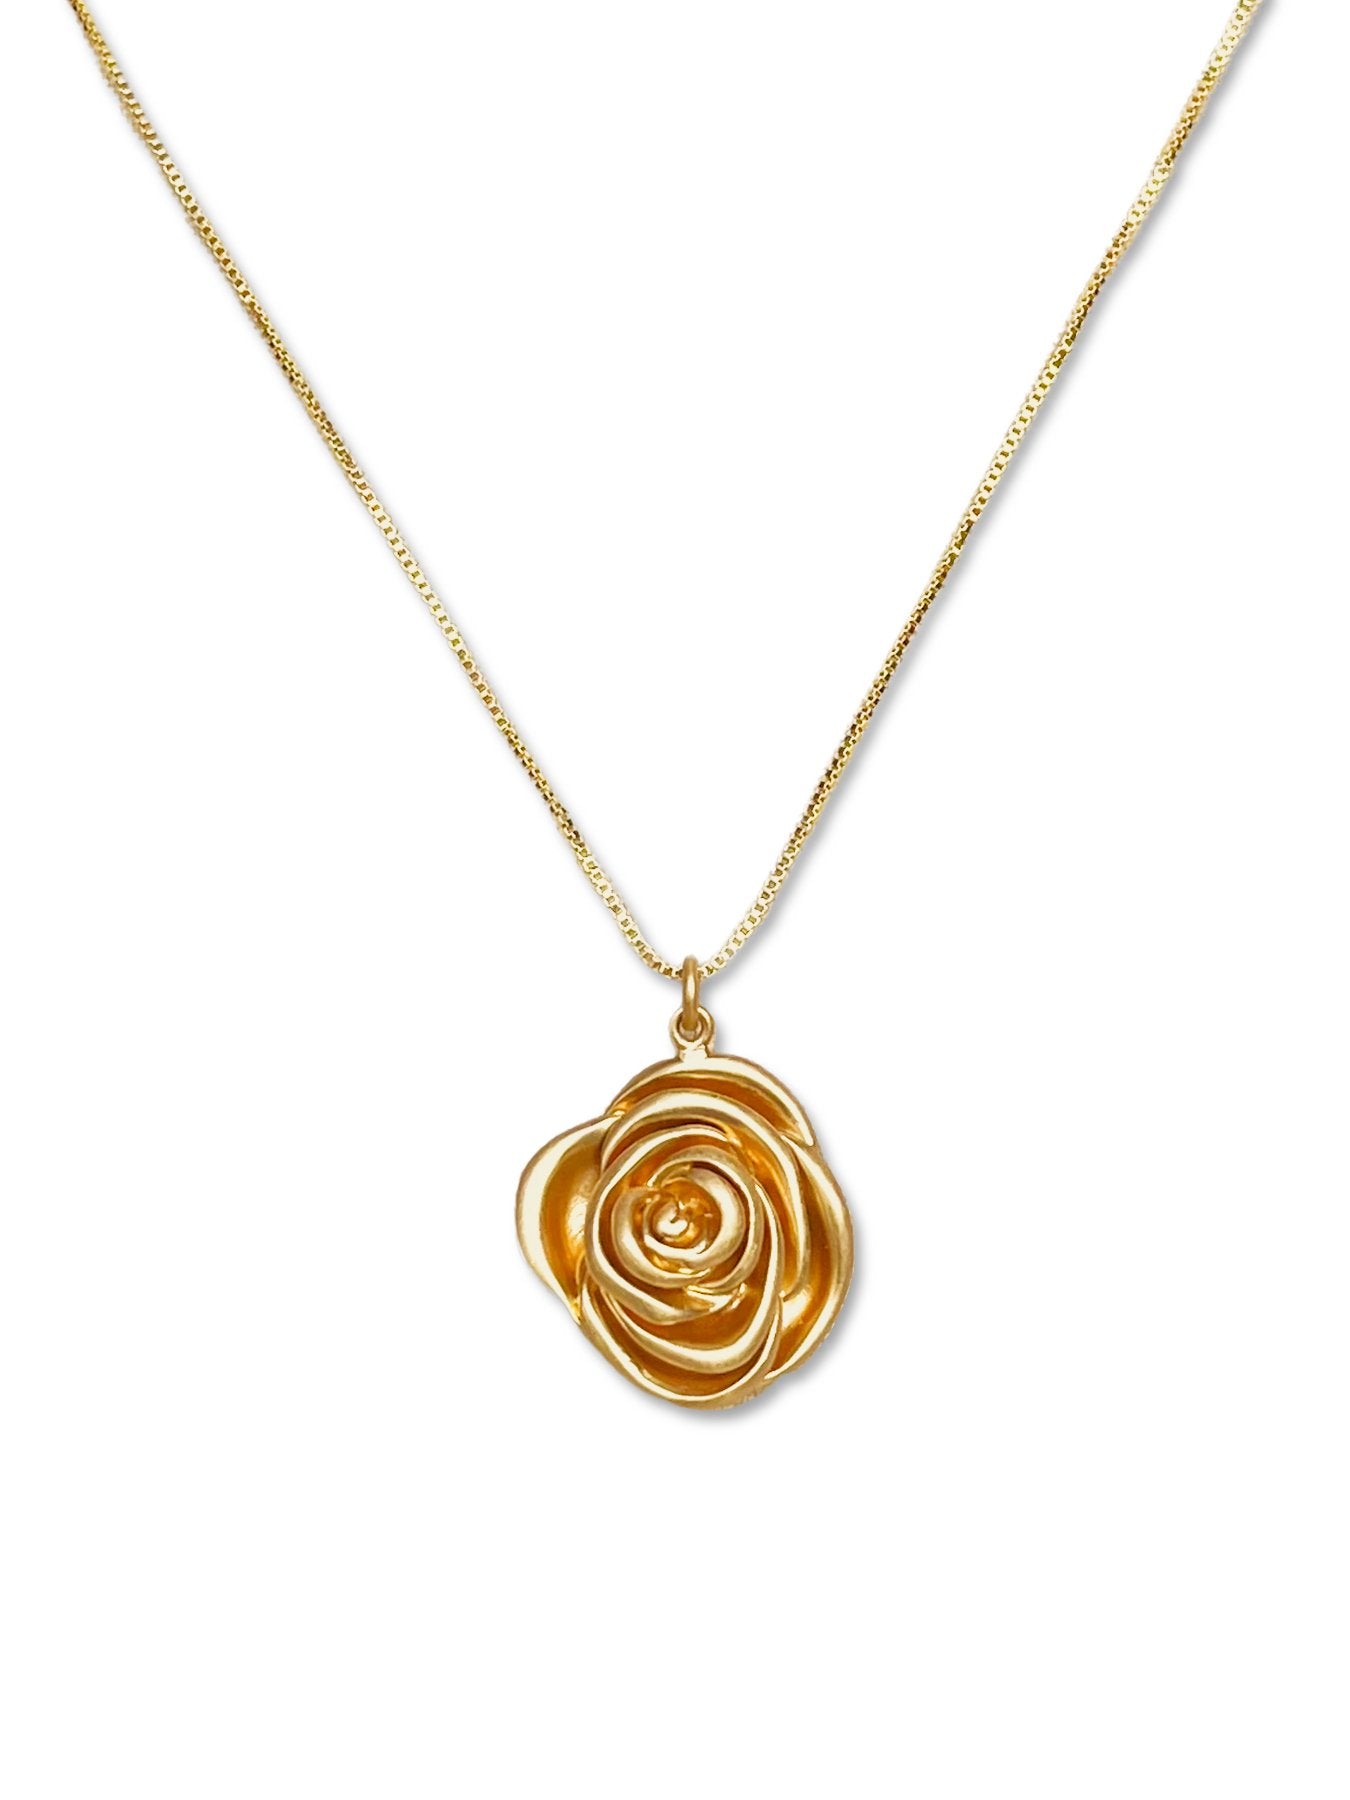 Rose Bloom Necklace - Lesley Evers - Accessories - accessory - Shop